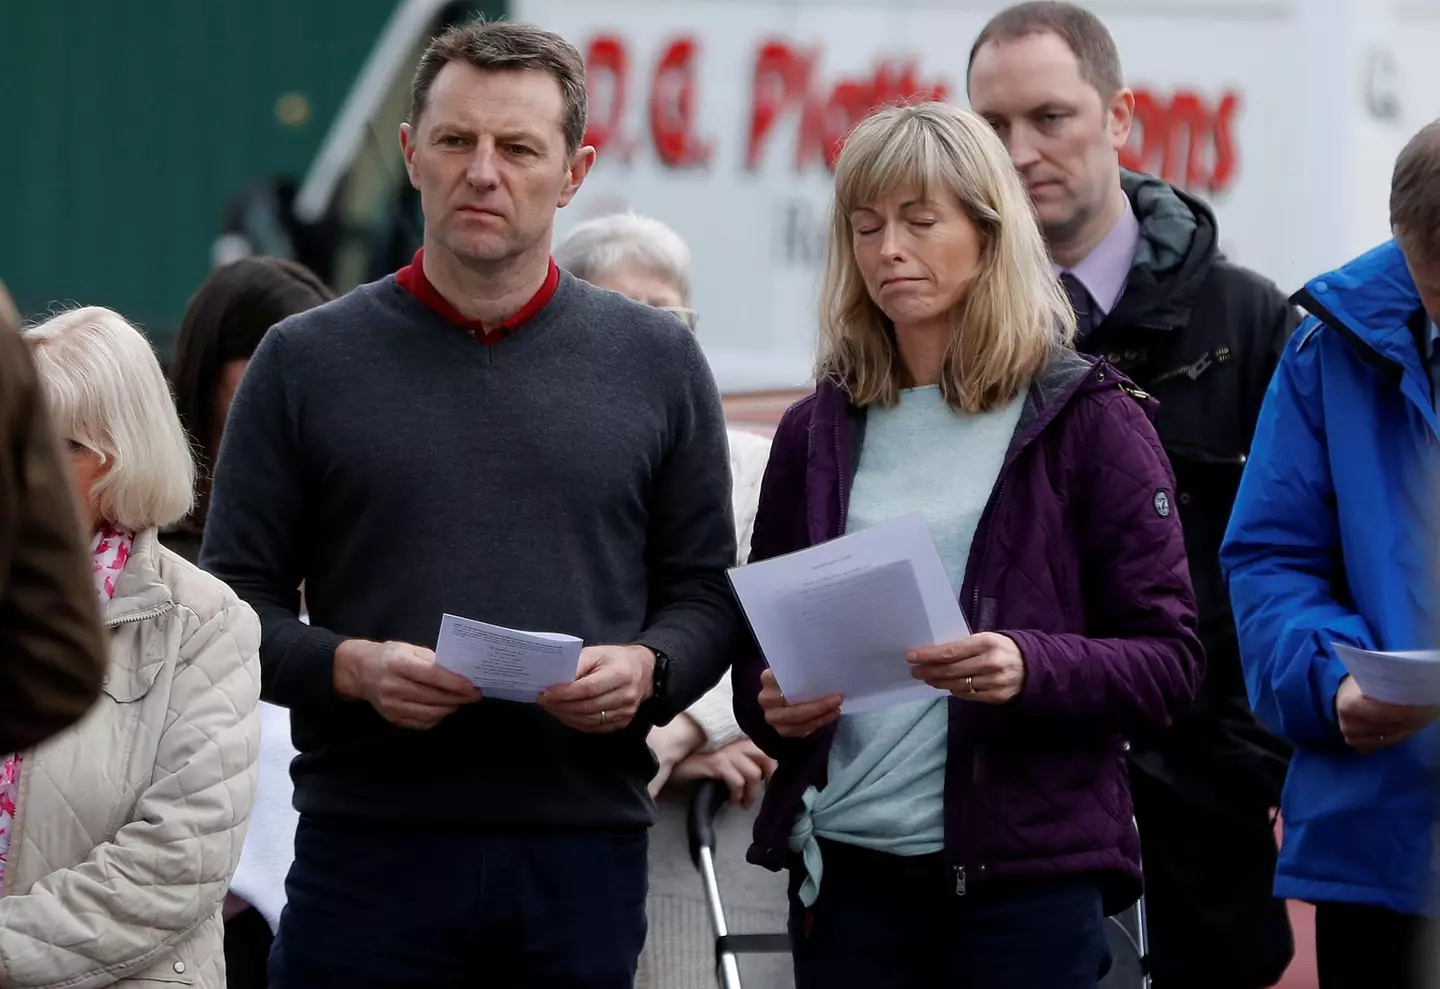 The McCann parents now have three months to appeal the court's decision.